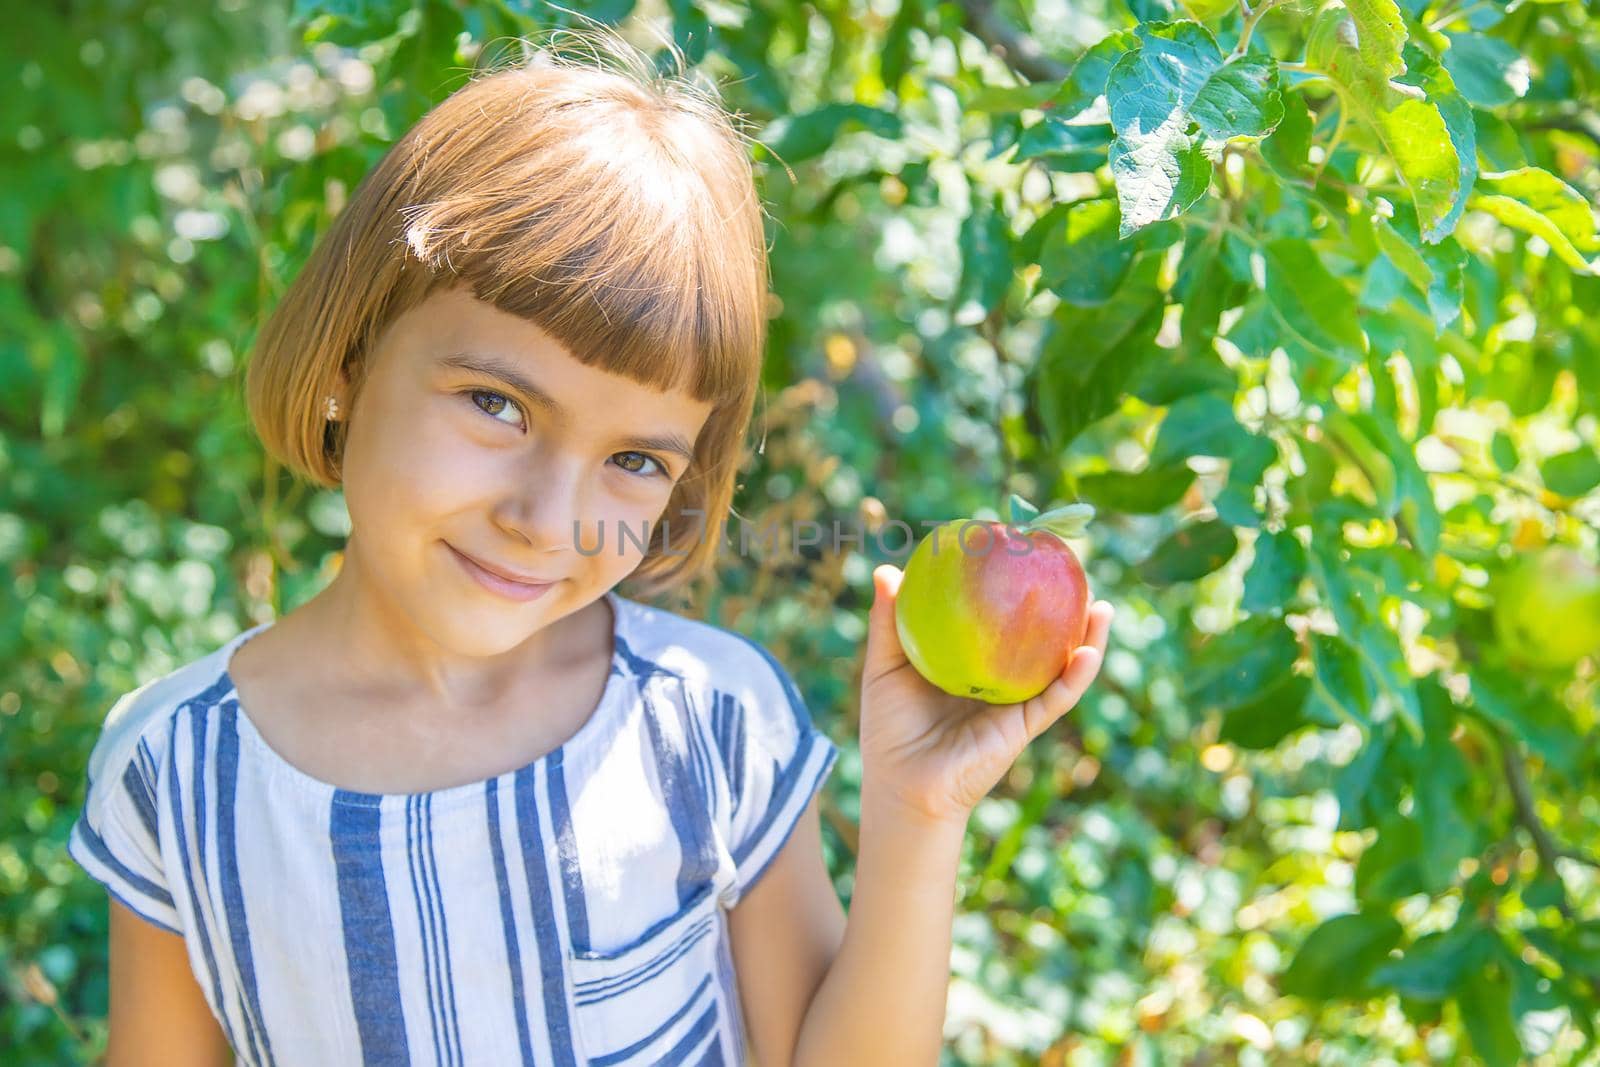 child with an apple in the garden. Selective focus.